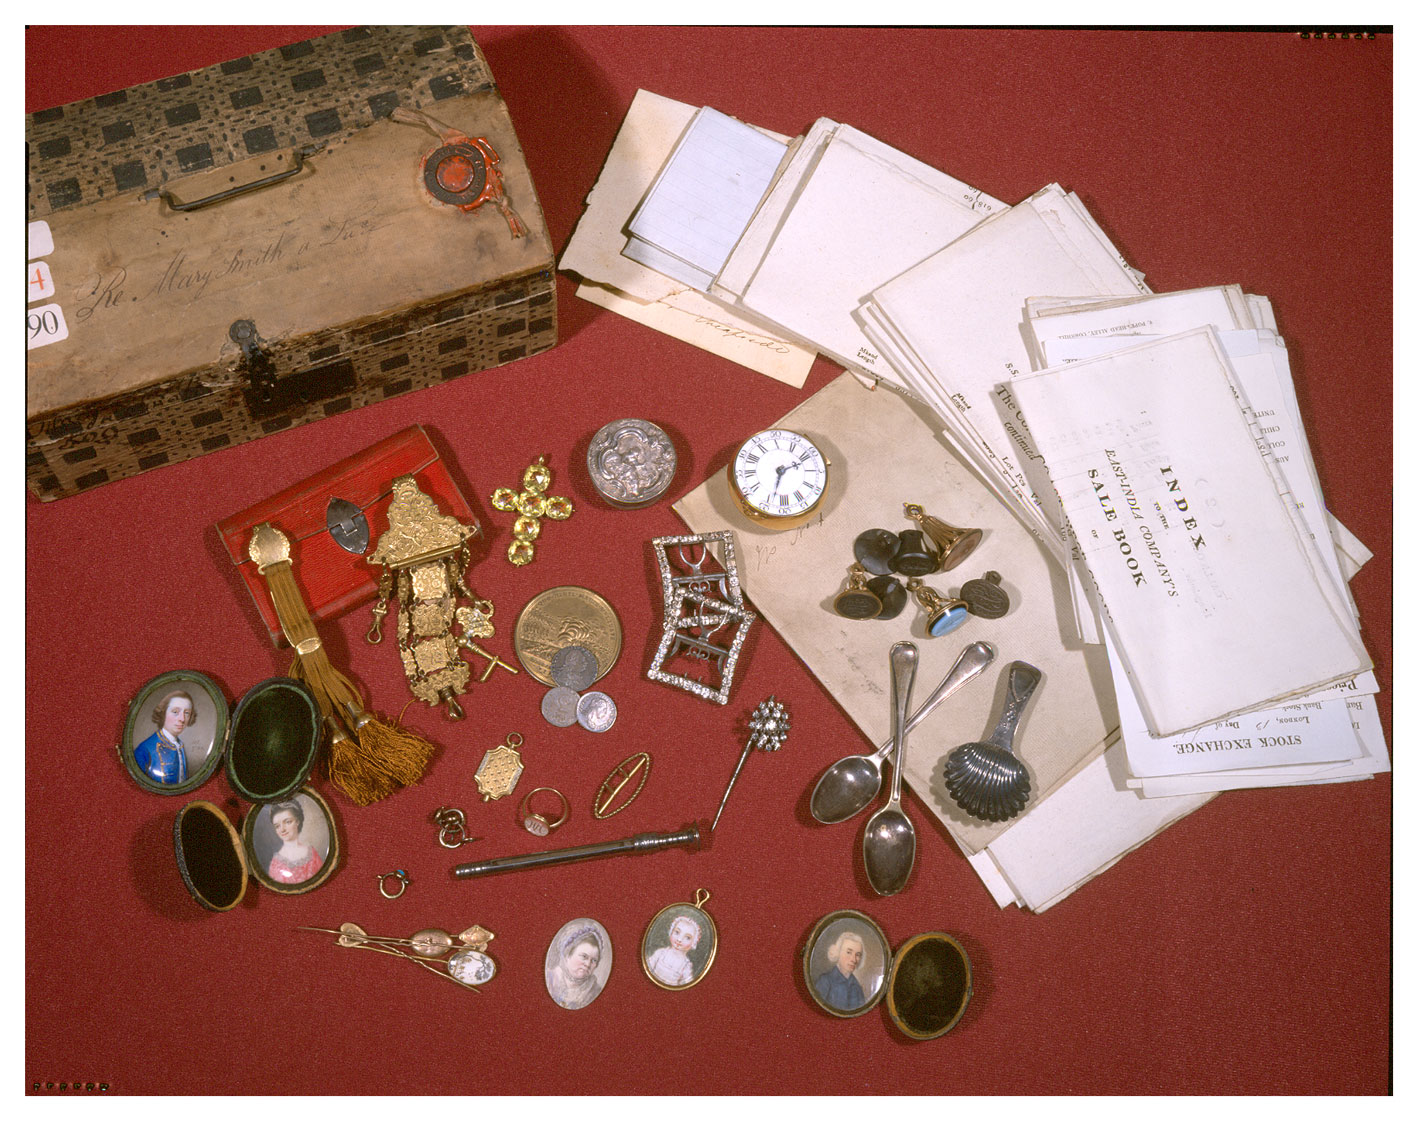 These items belonged to Mary Smith who lived at Christ's Hospital in London and died in 1810 (C 114/190)